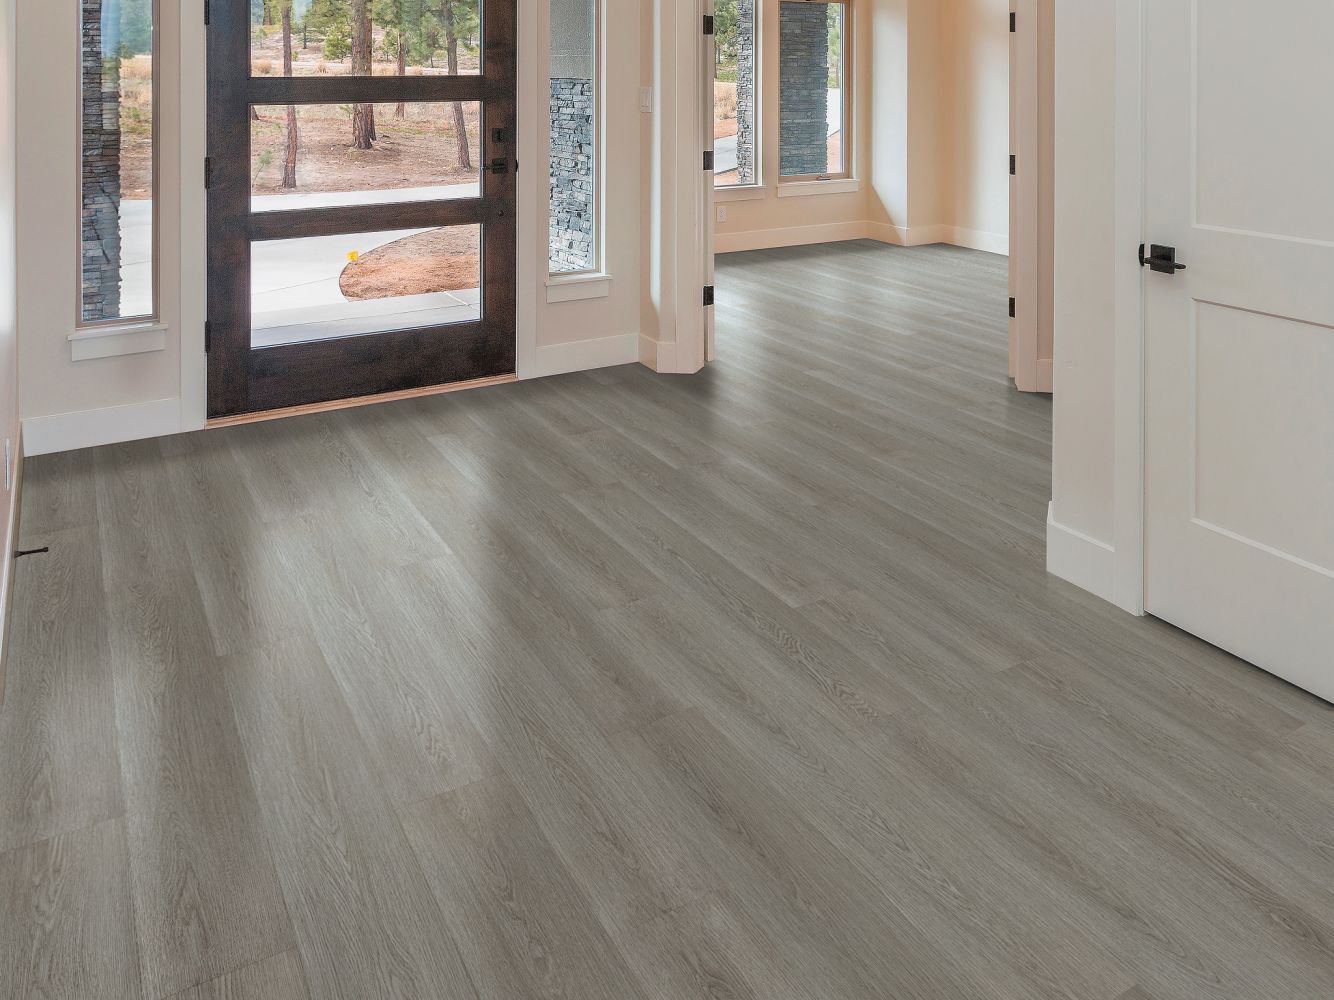 Shaw Floors Resilient Residential Dwell Hearthstone Grey 05234_3080V